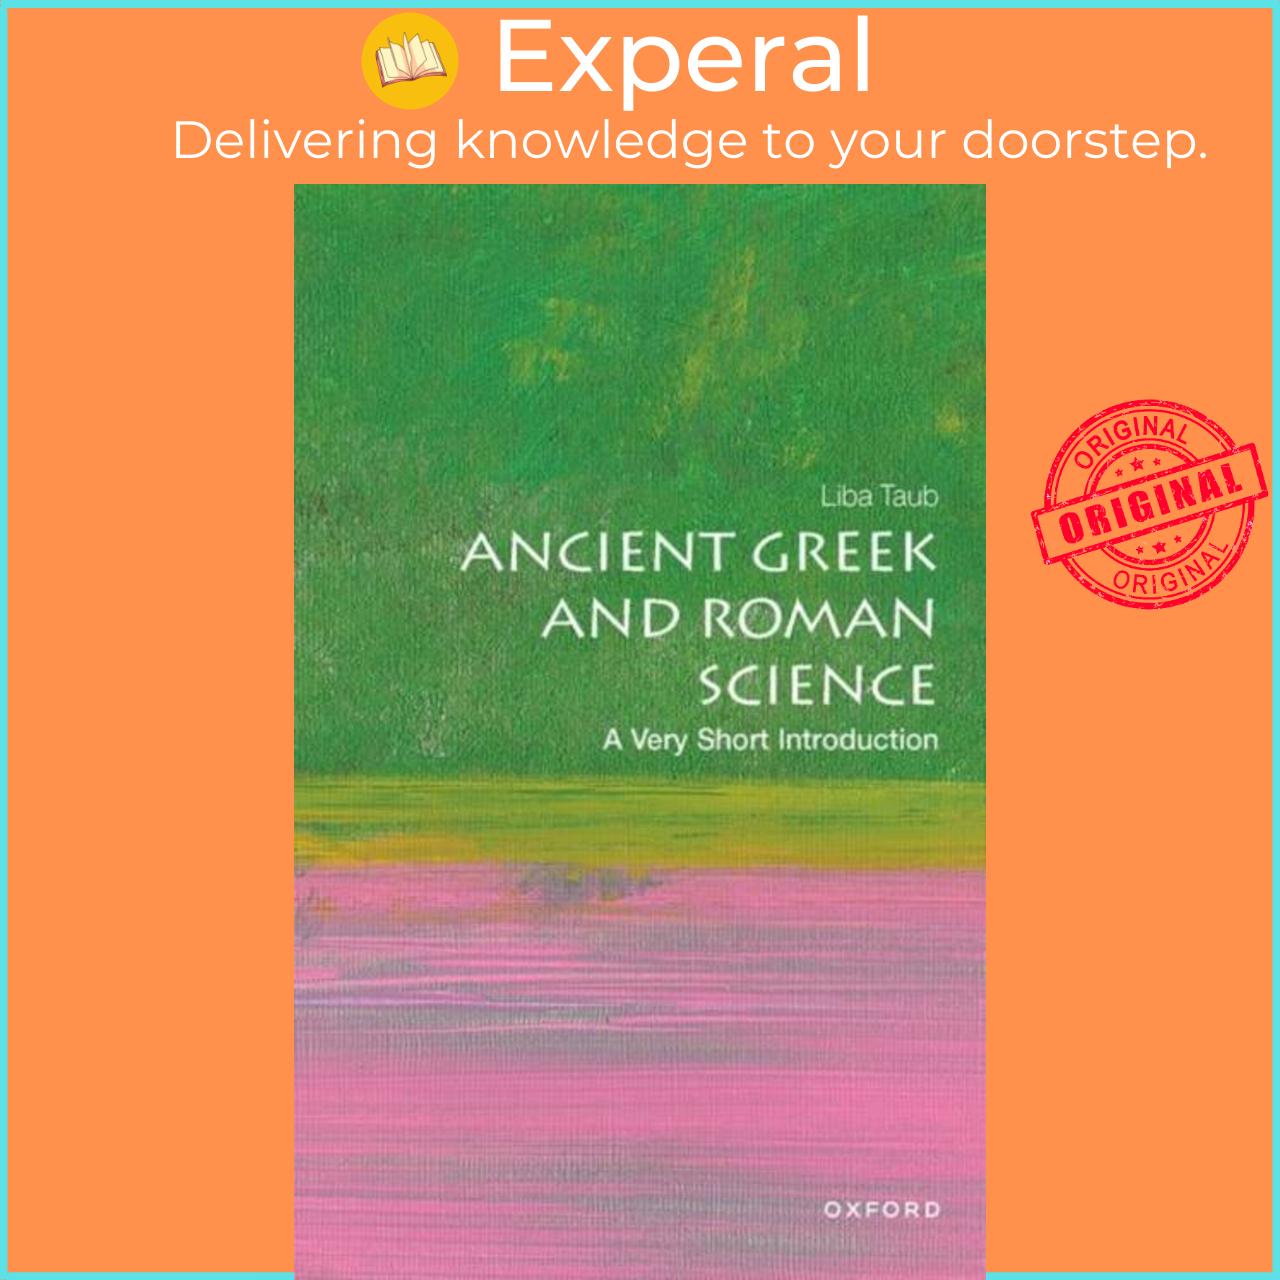 Sách - Ancient Greek and Roman Science: A Very Short Introduction by Liba Taub (UK edition, paperback)